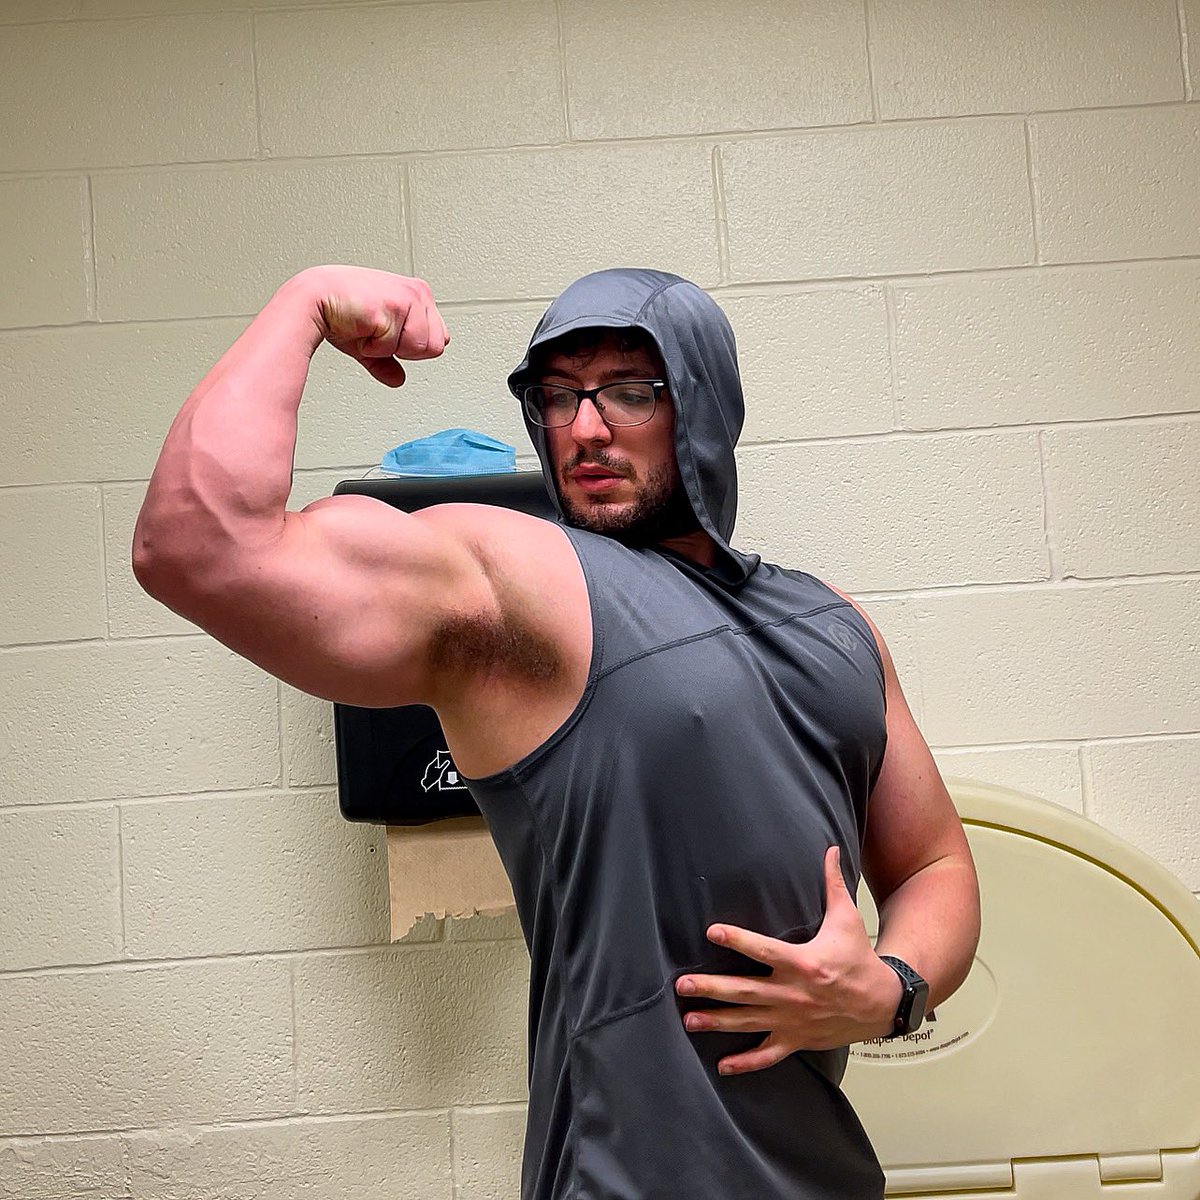 I’m going to start posting on here again #fitness #armday #fit #fitfam #homeworkout #workout #lift #fitnessdaily #fitnessmotivation #quarantineworkout #fitlife #trainer #fitnessjourney #motivation #potd #fitspo #fitnation #fitguys #fitinspiration  #fitlifestyle